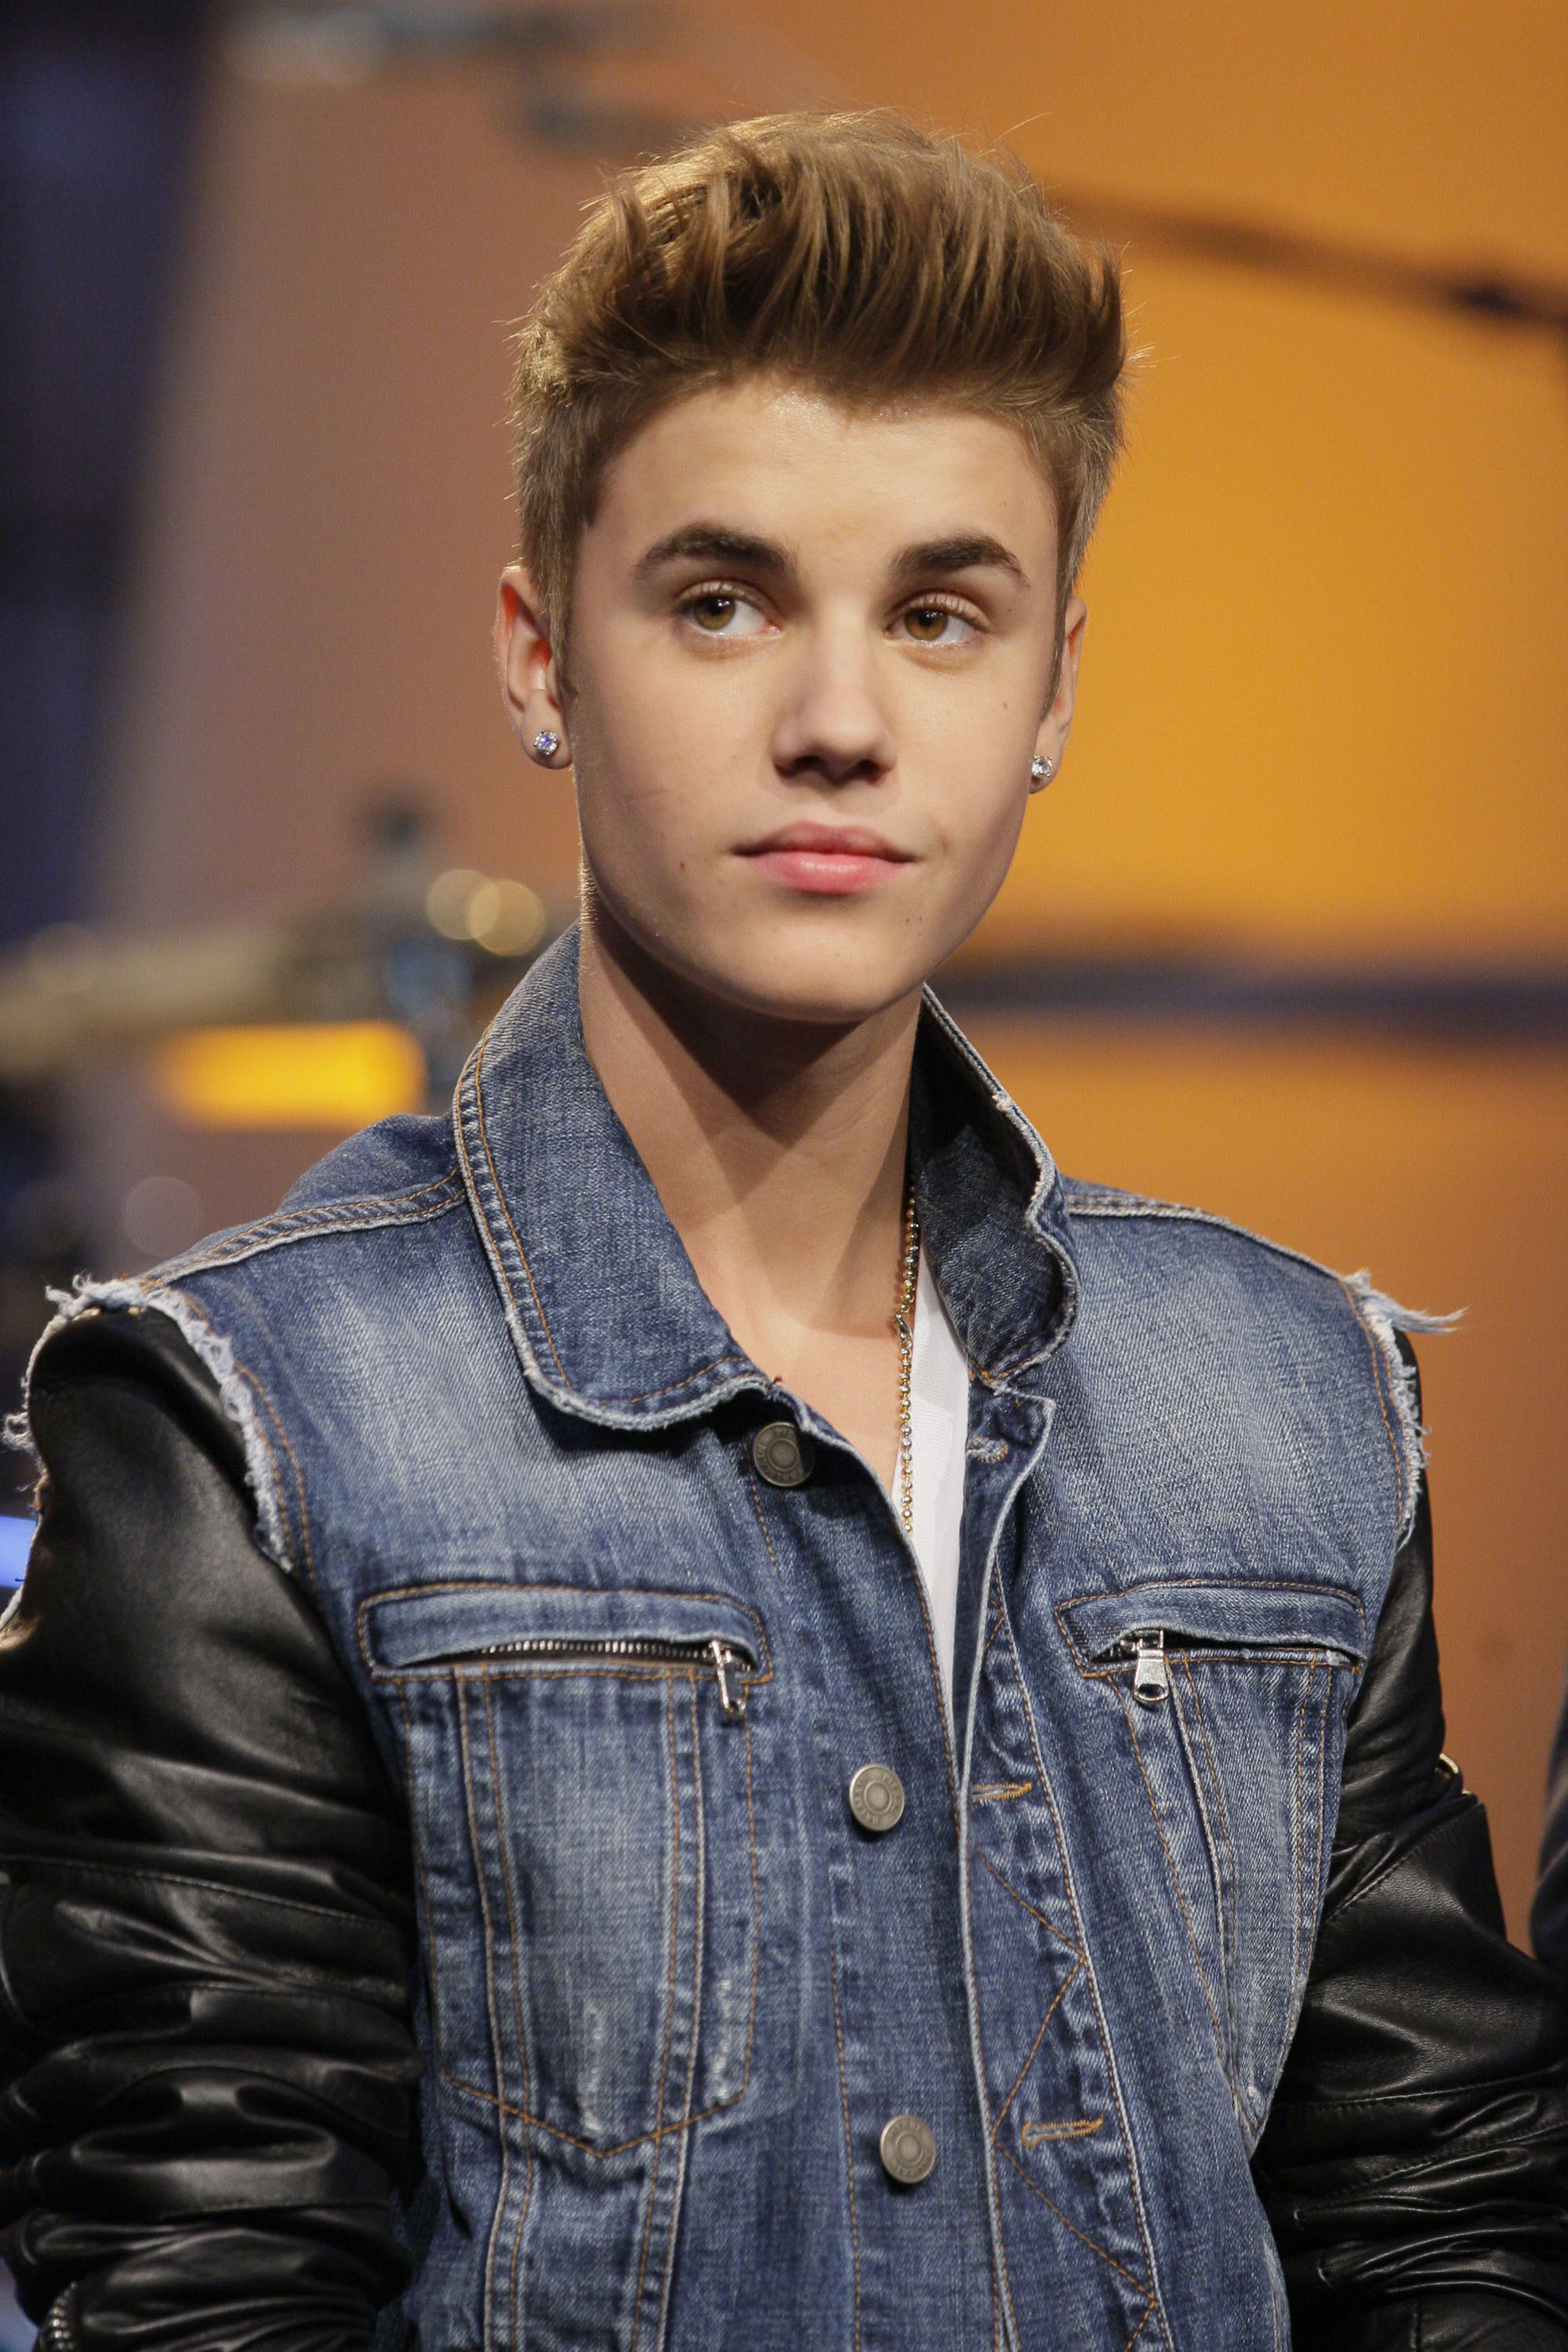 Close-up of Justin as a teen in denim and his hair in an updo